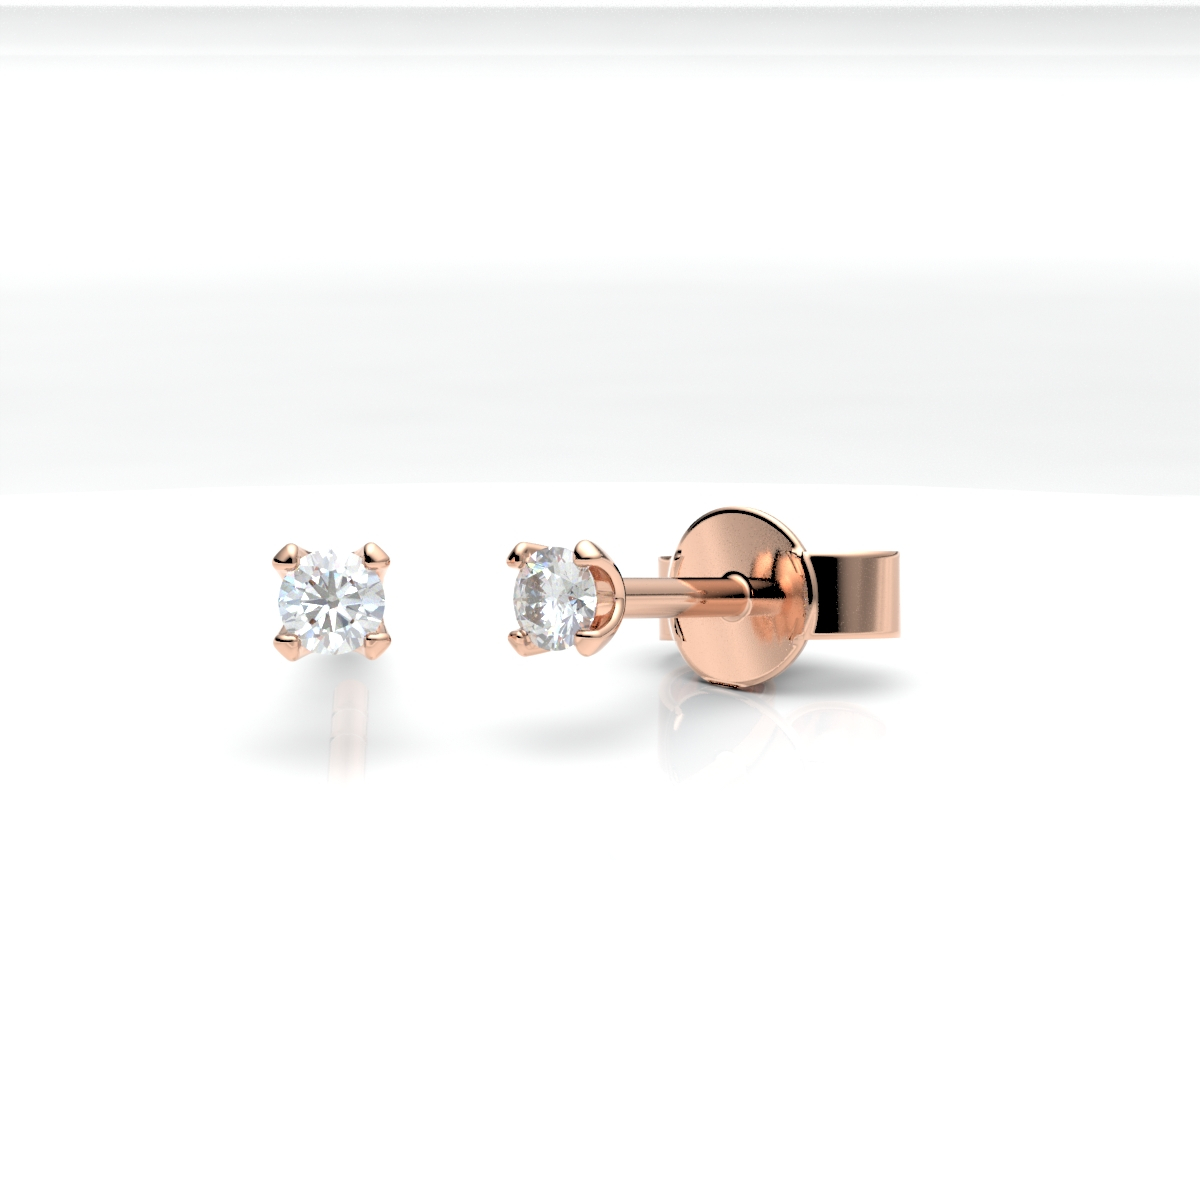 012502-5H24-001 | Ohrstecker Freiberg 012502 585 Roségold Brillant 0,100 ct H-SI ∅ 2.4mm100% Made in Germany  